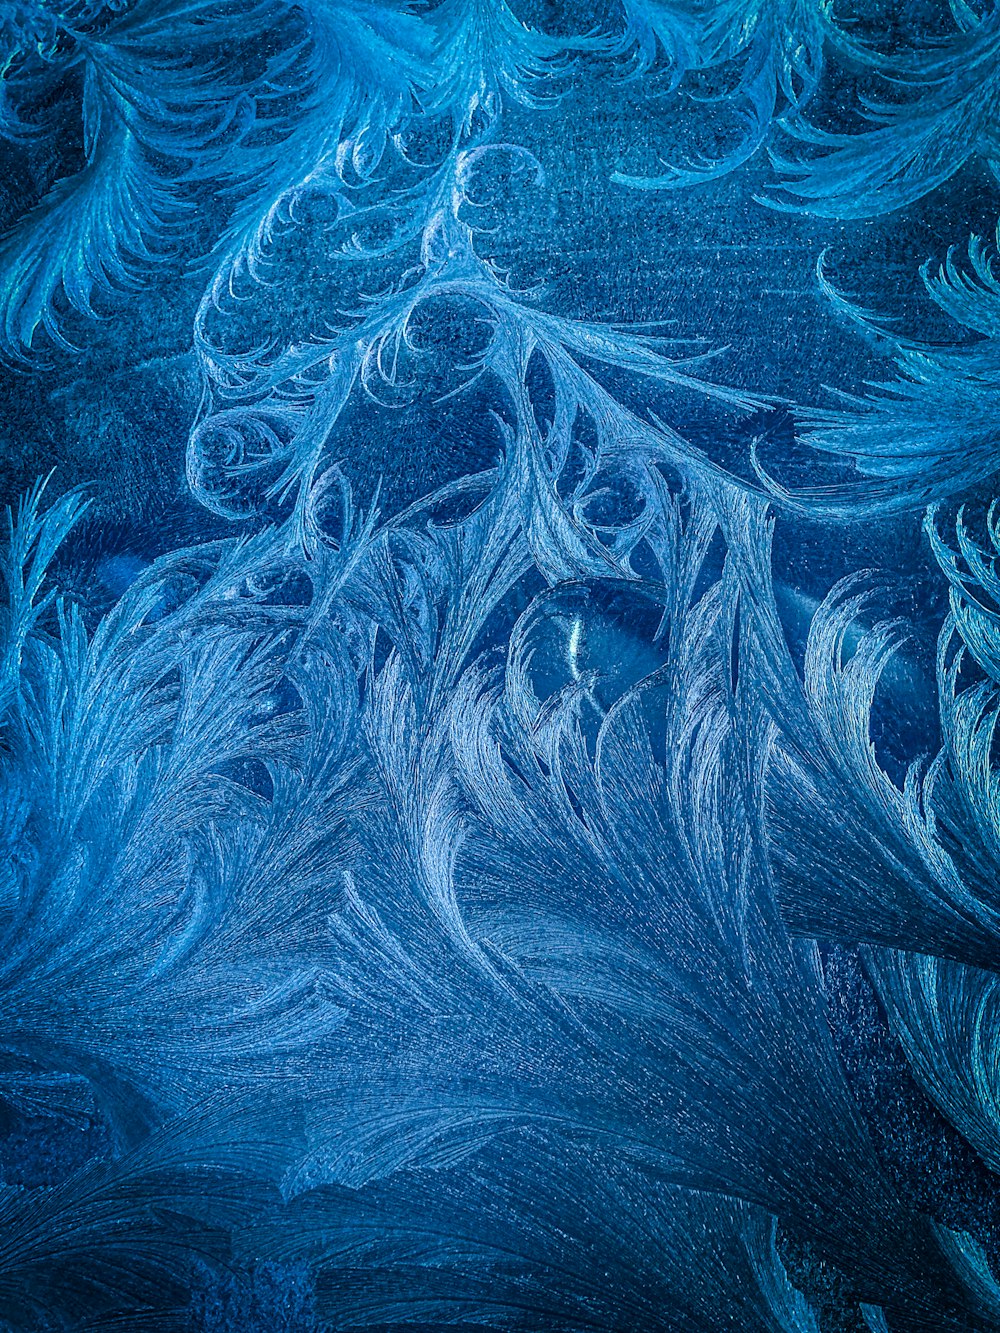 a close up view of a pattern of blue feathers